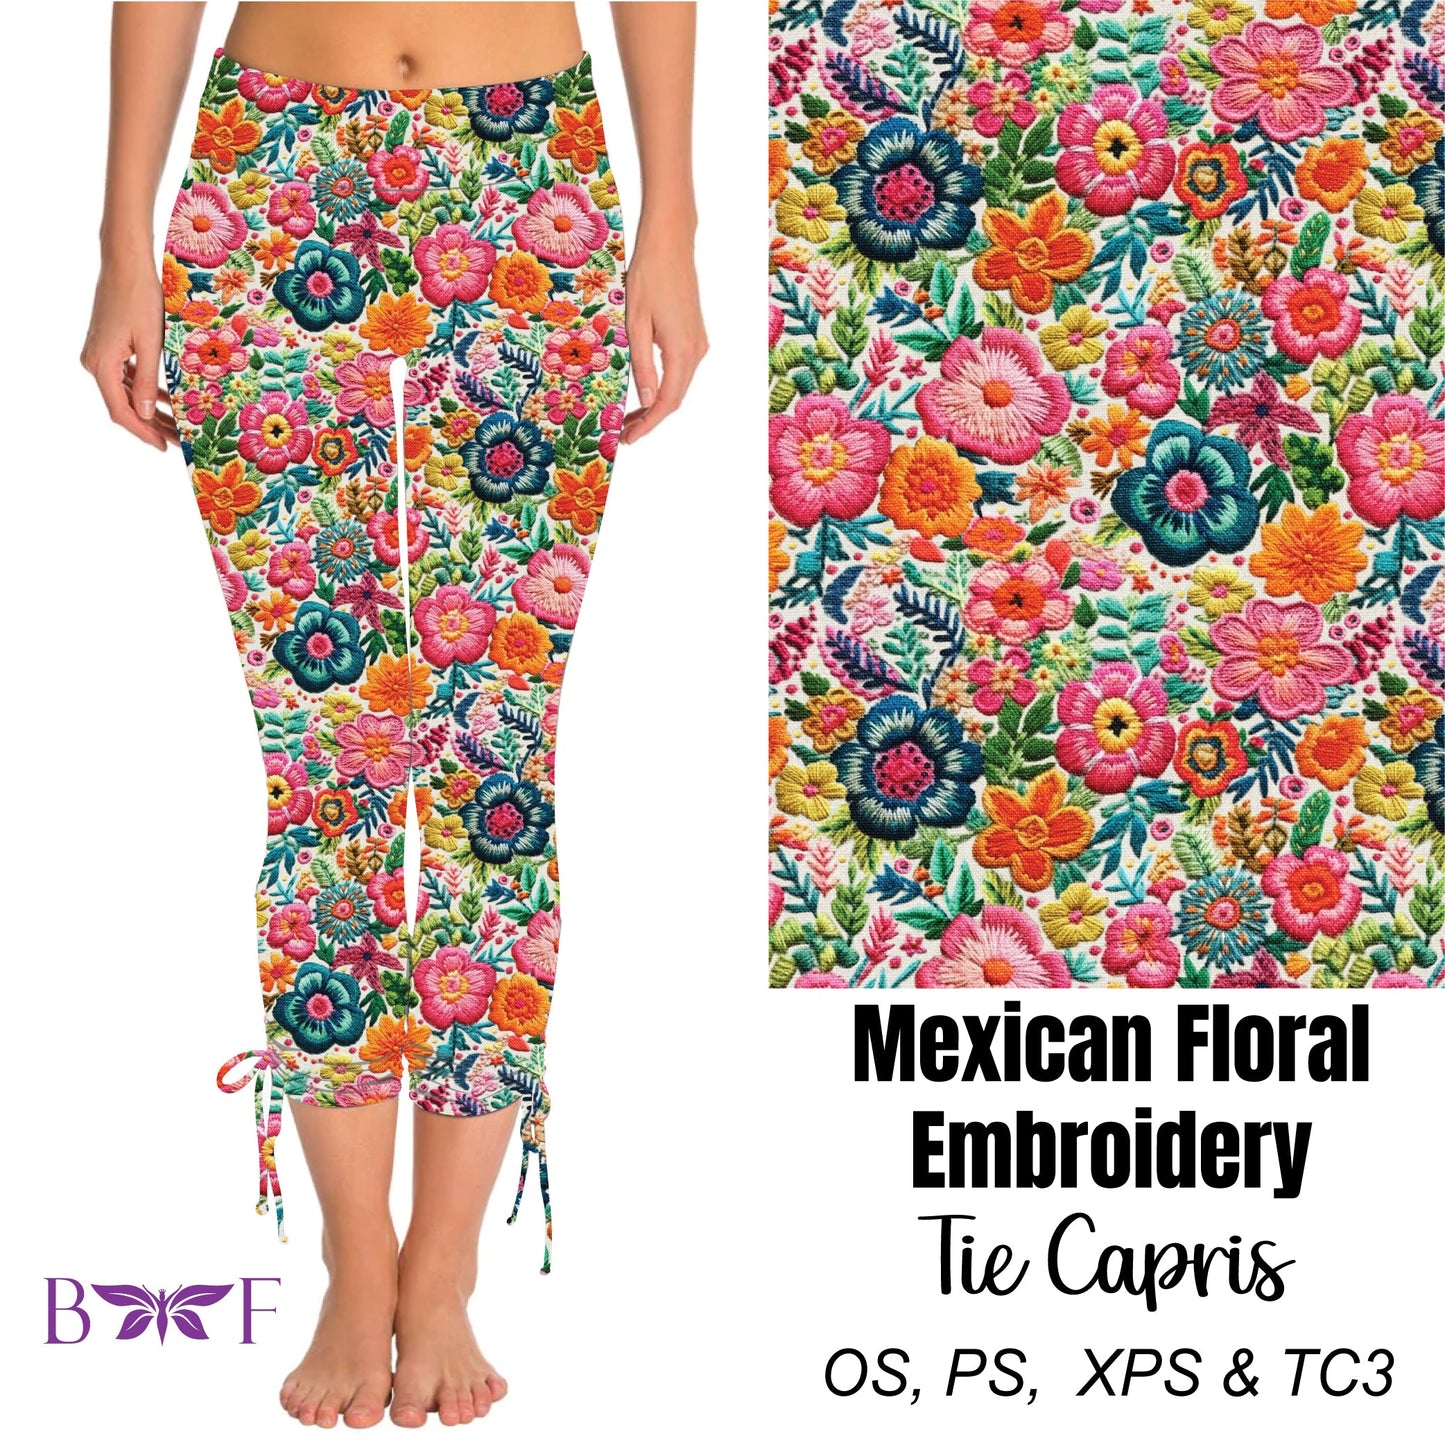 Mexican Floral Embroidery Side Tie Capris Preorder #0526